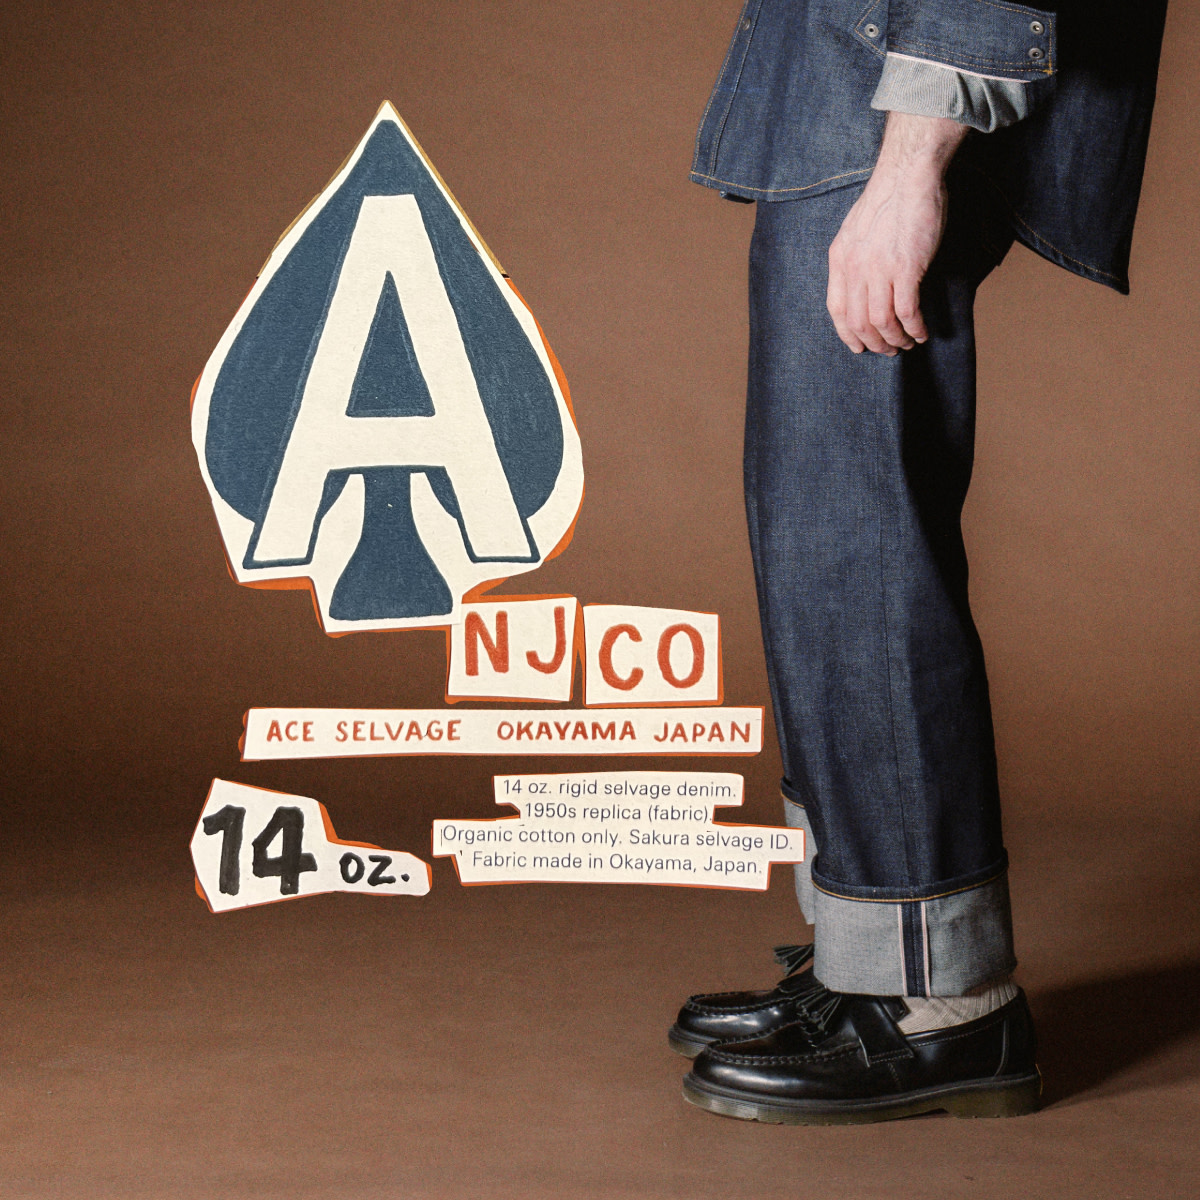 Ace Selvage